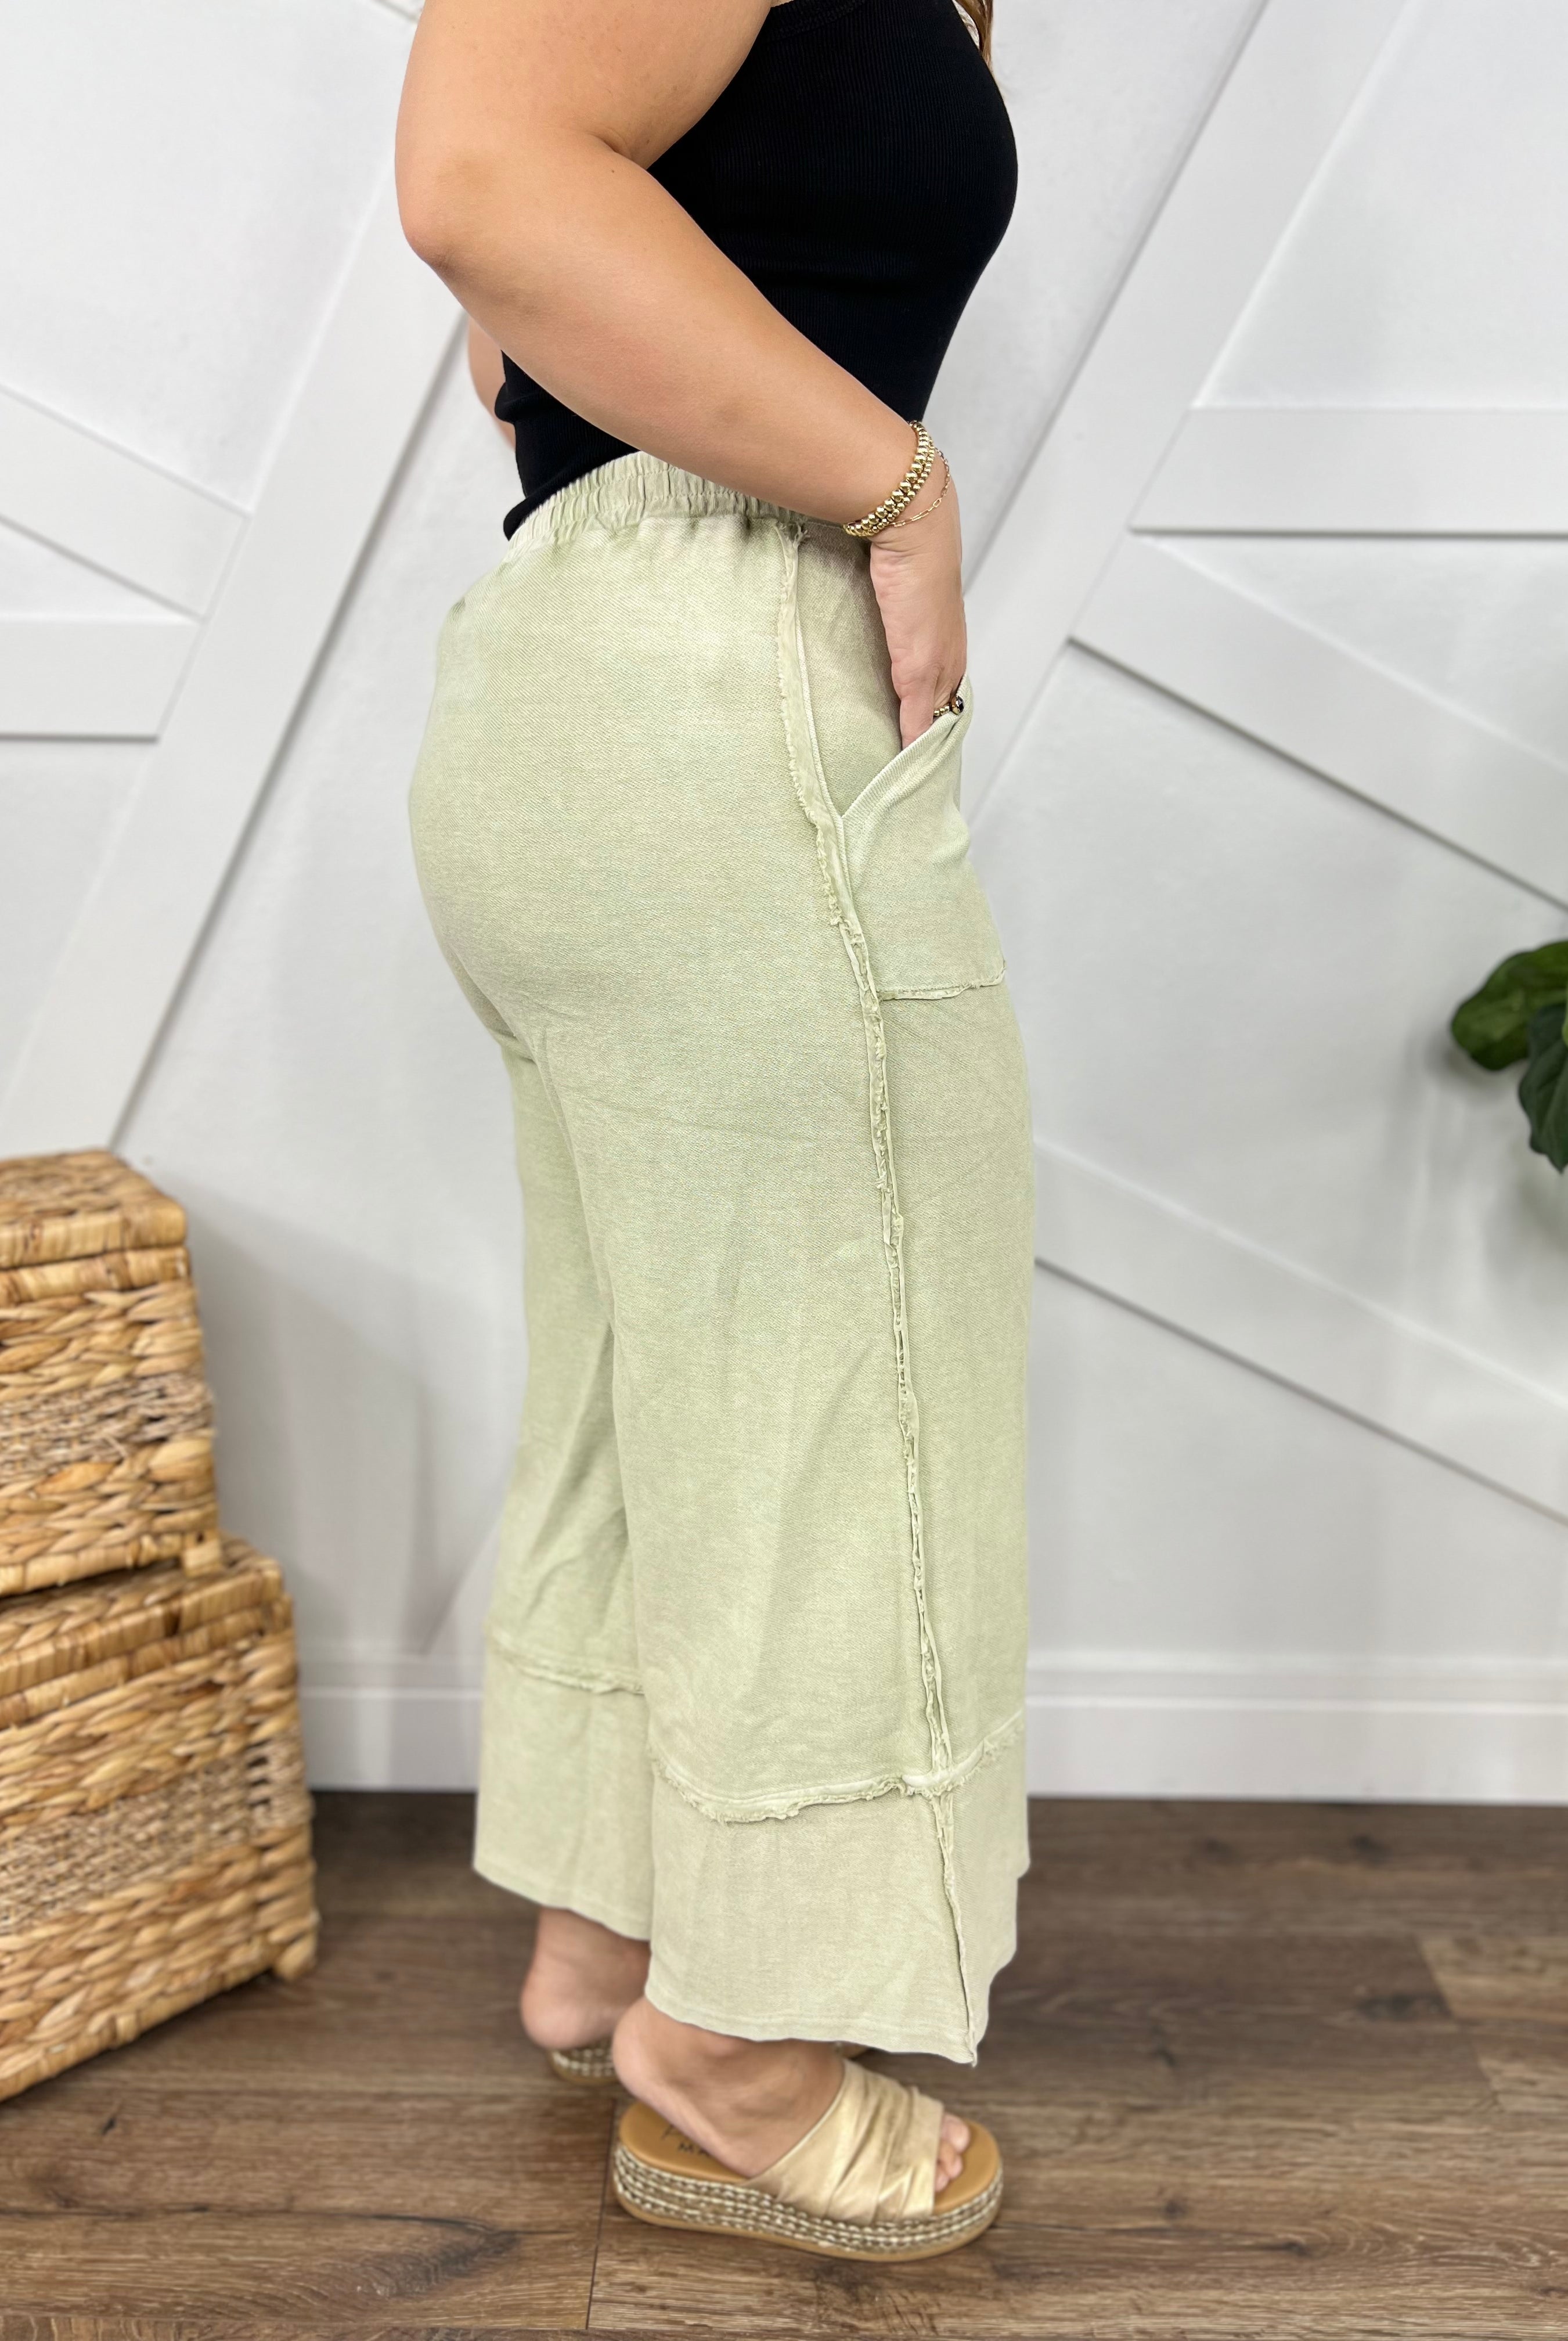 RESTOCK : Party Time Palazzo Pants-150 PANTS-Easel-Heathered Boho Boutique, Women's Fashion and Accessories in Palmetto, FL